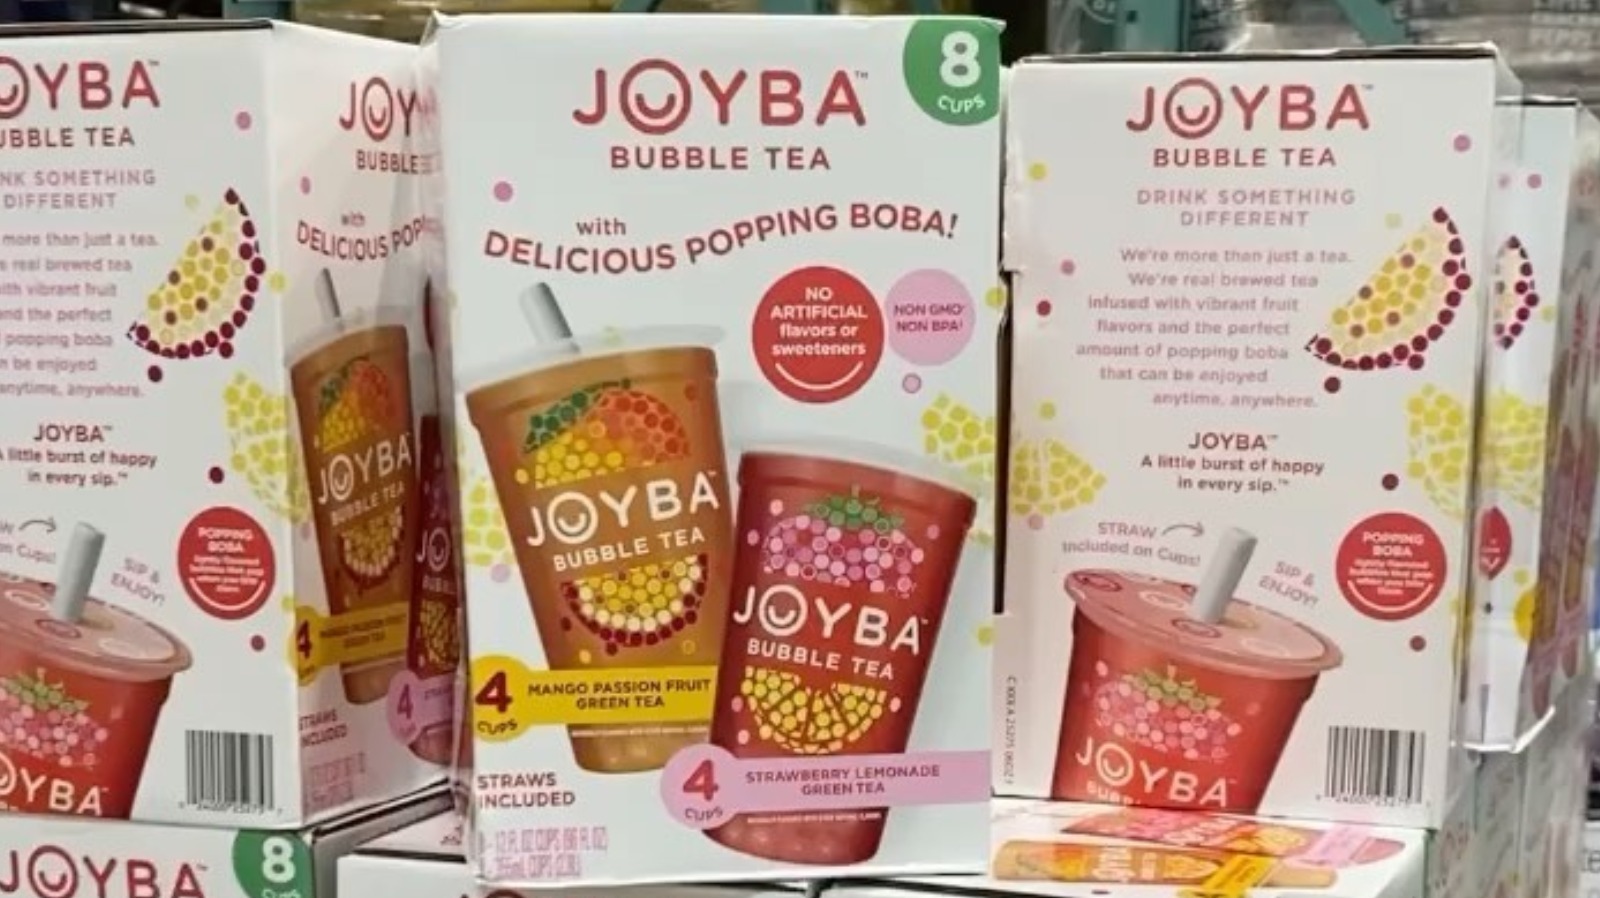 https://www.mashed.com/img/gallery/costco-fans-are-intrigued-by-these-popping-boba-bubble-tea-cups/l-intro-1626487144.jpg